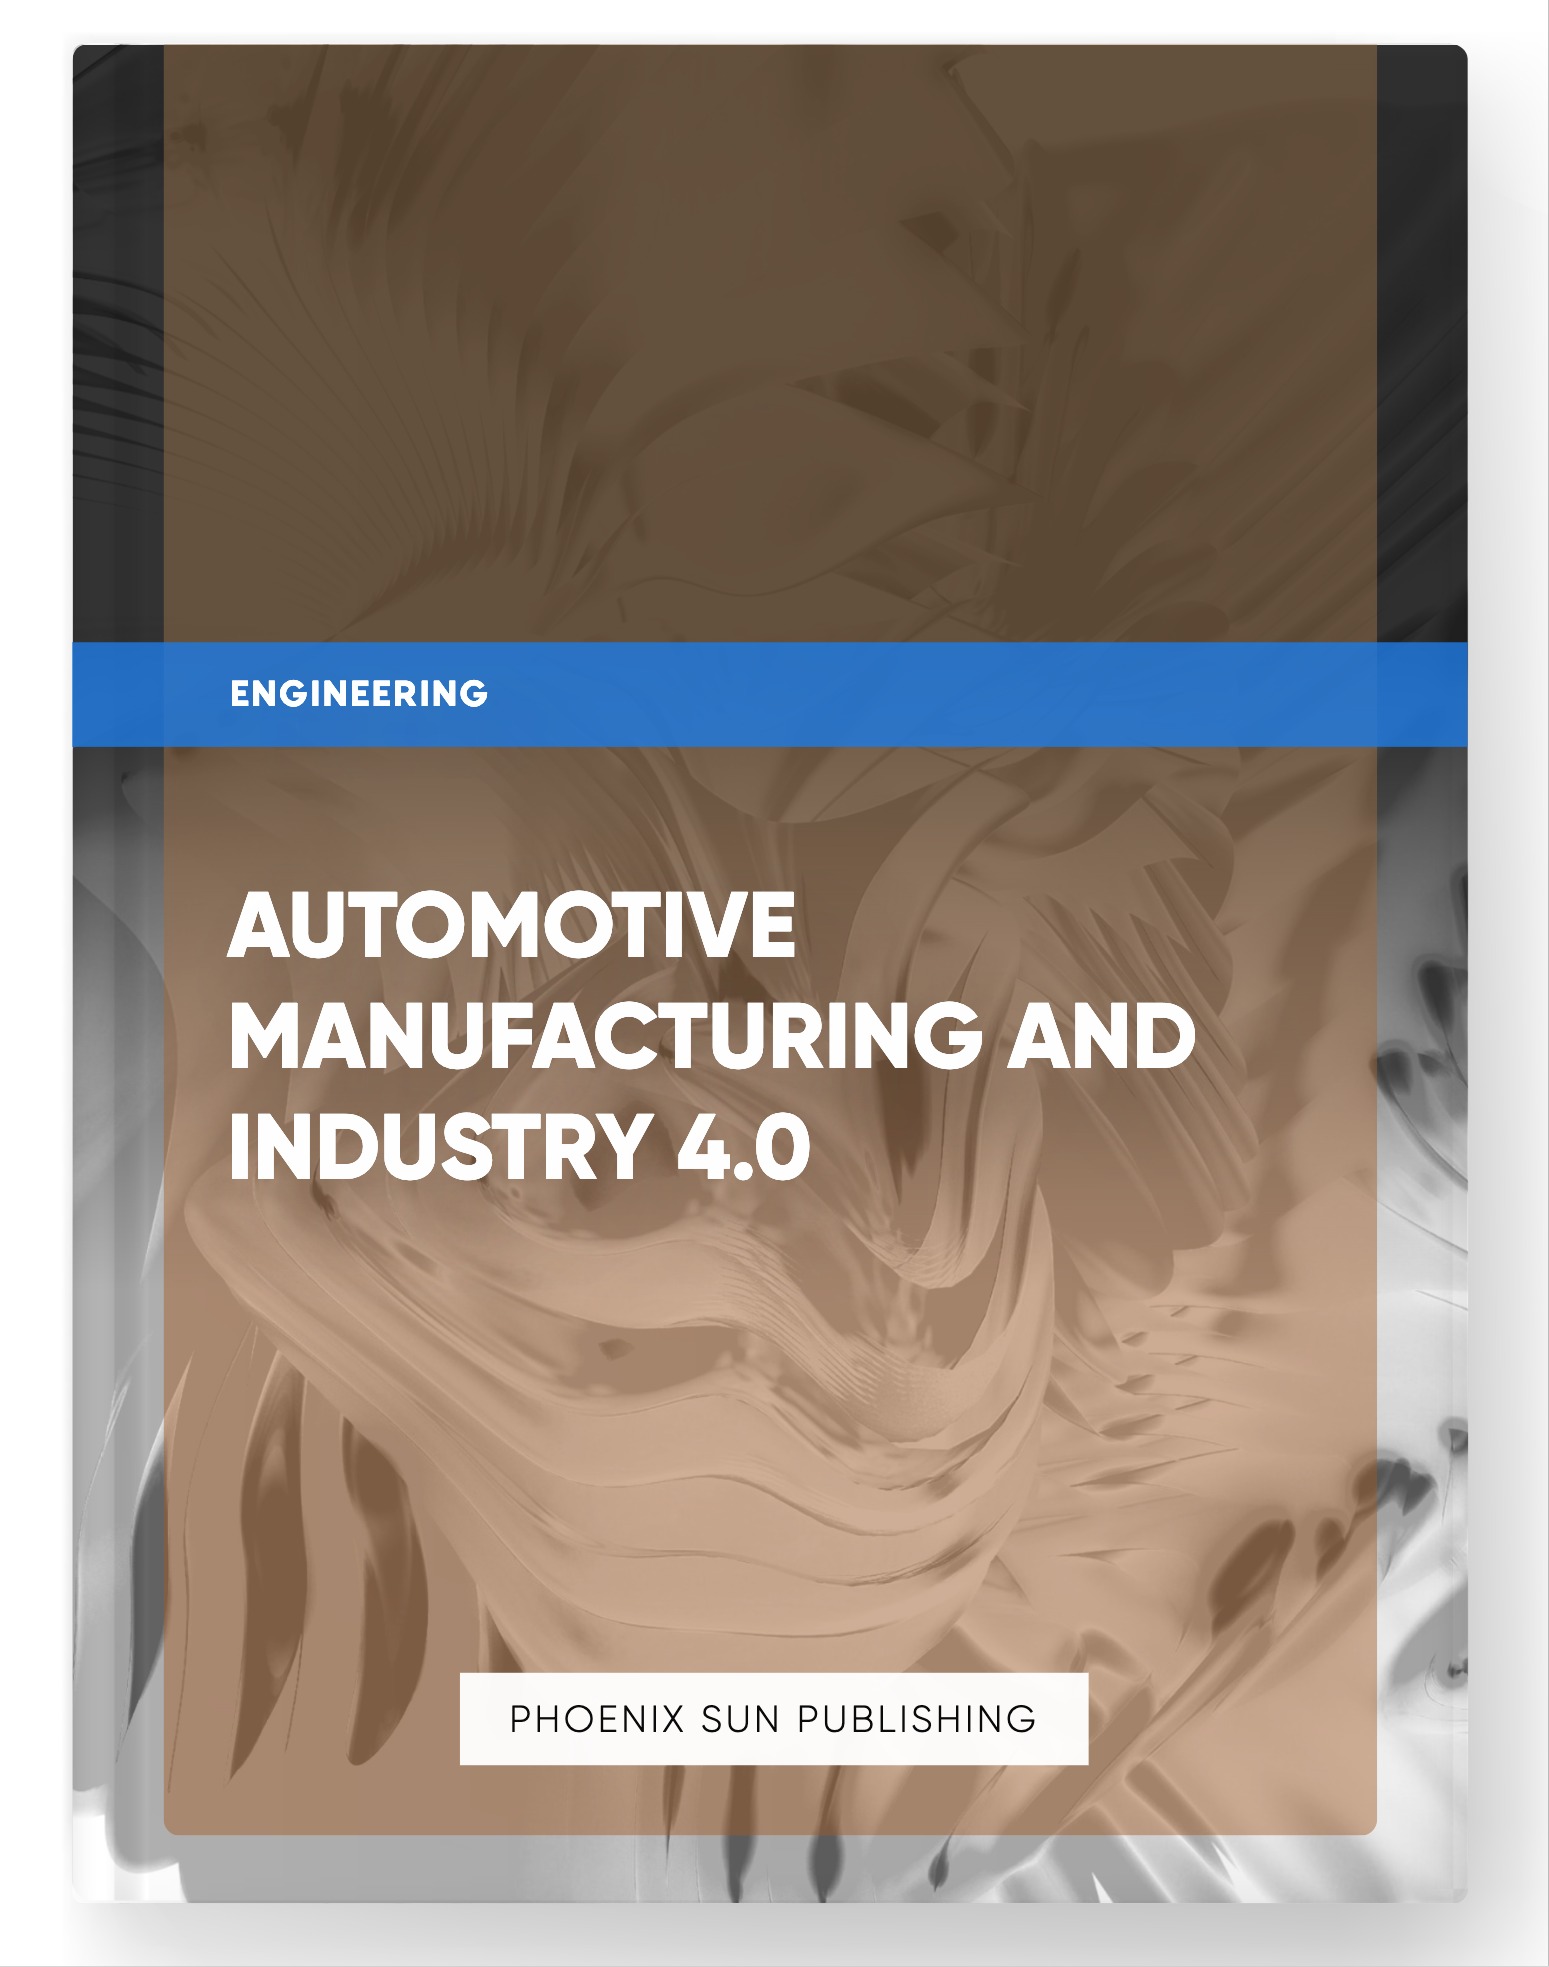 Automotive Manufacturing and Industry 4.0